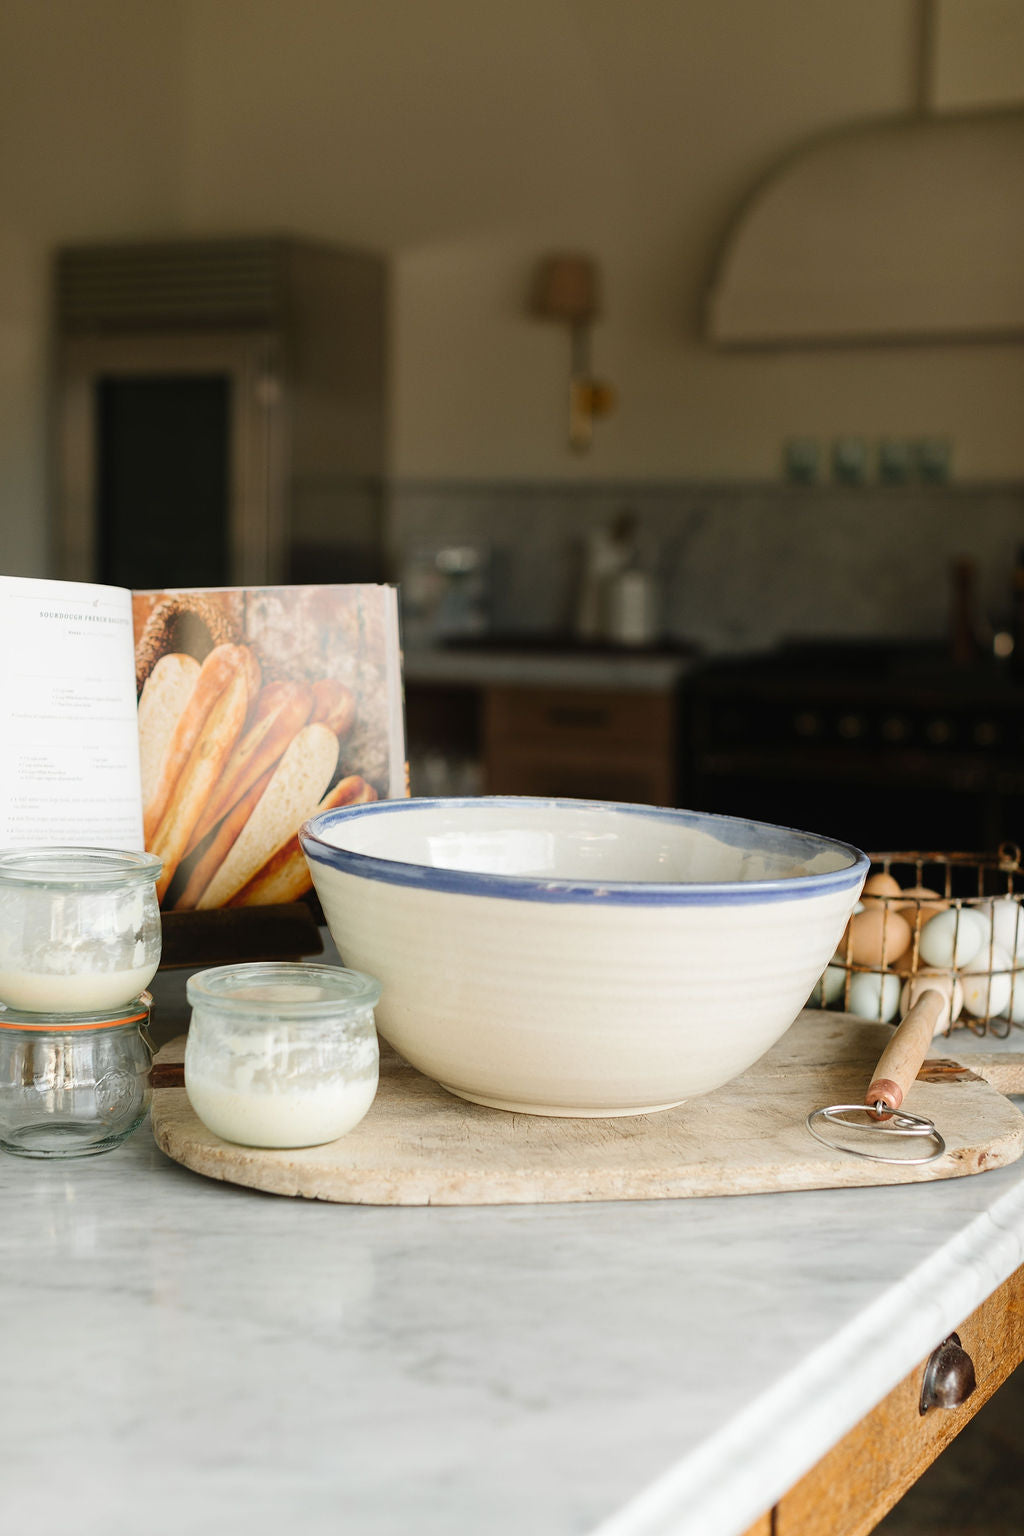 Mixing Bowl, LG White and Blue – The Food Nanny